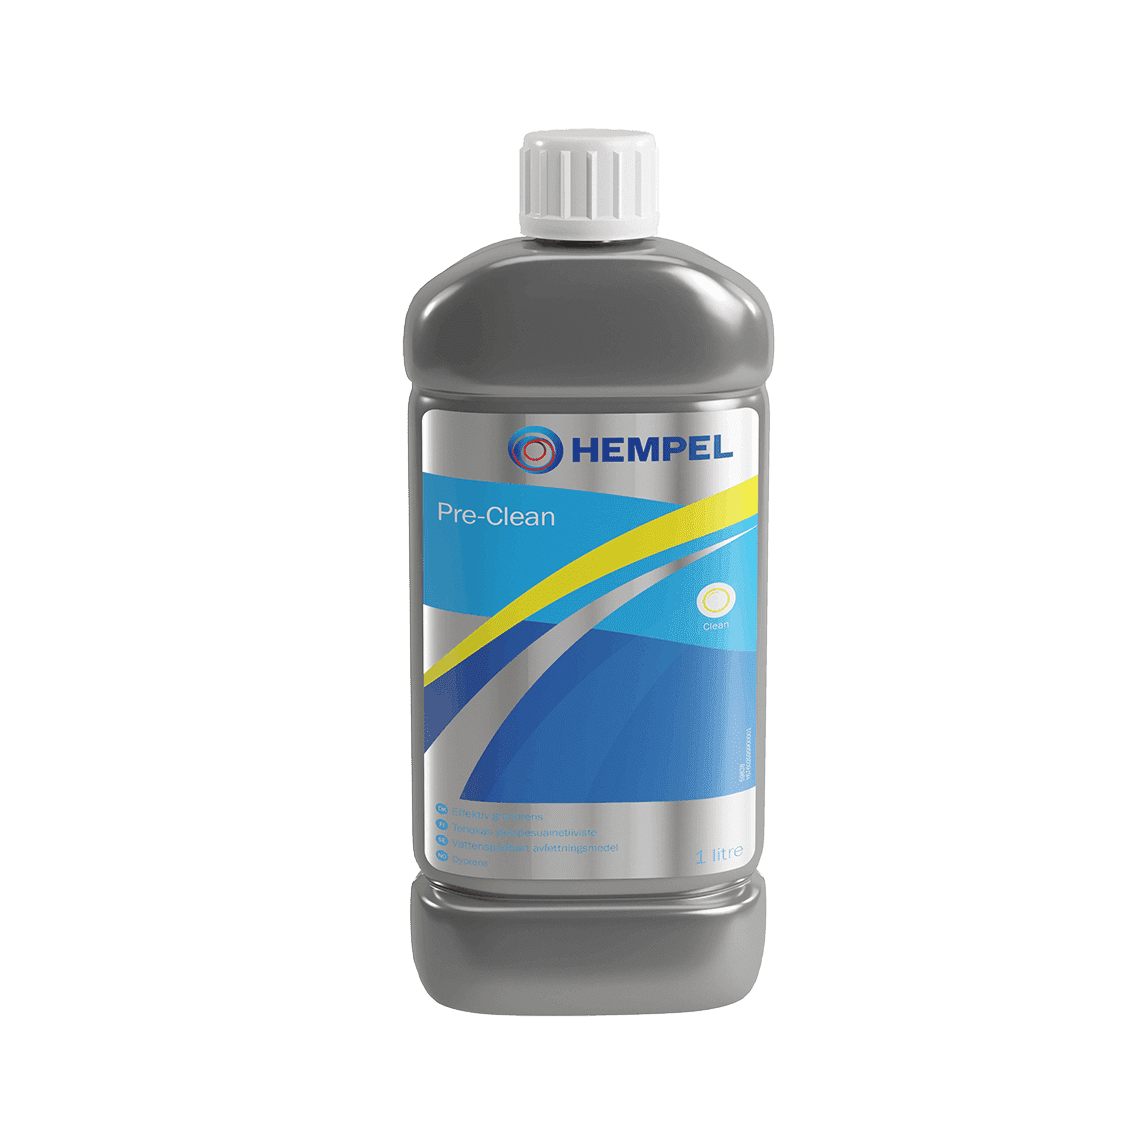 Hempel / Blakes Pre-Clean Cleaner And Degreaser - 1 Litre